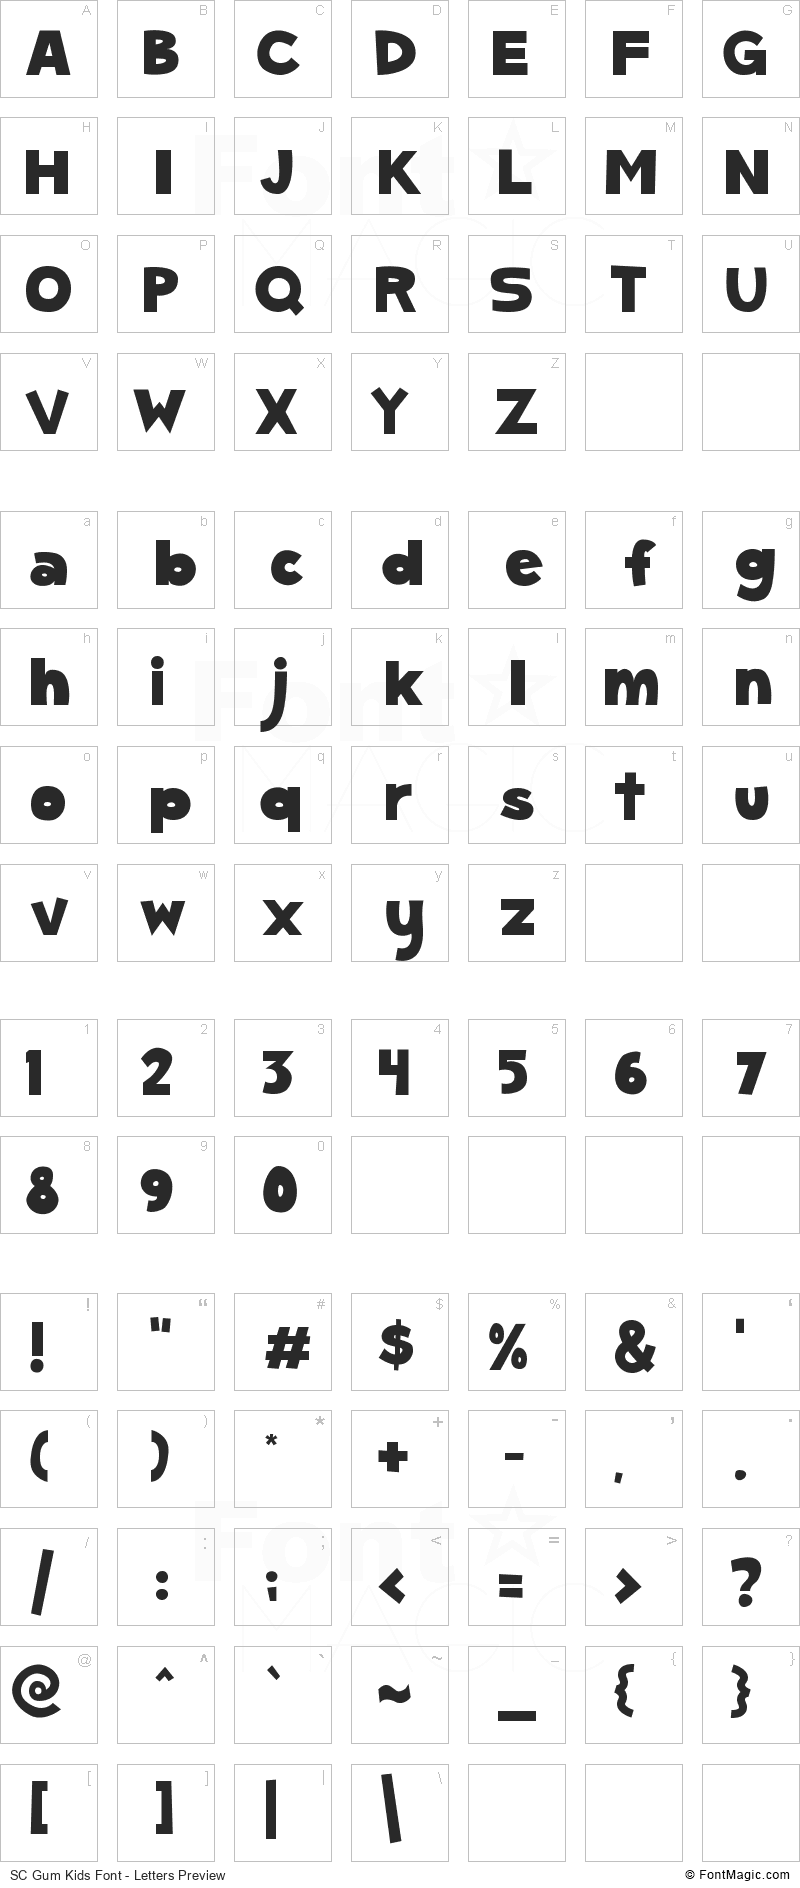 SC Gum Kids Font - All Latters Preview Chart